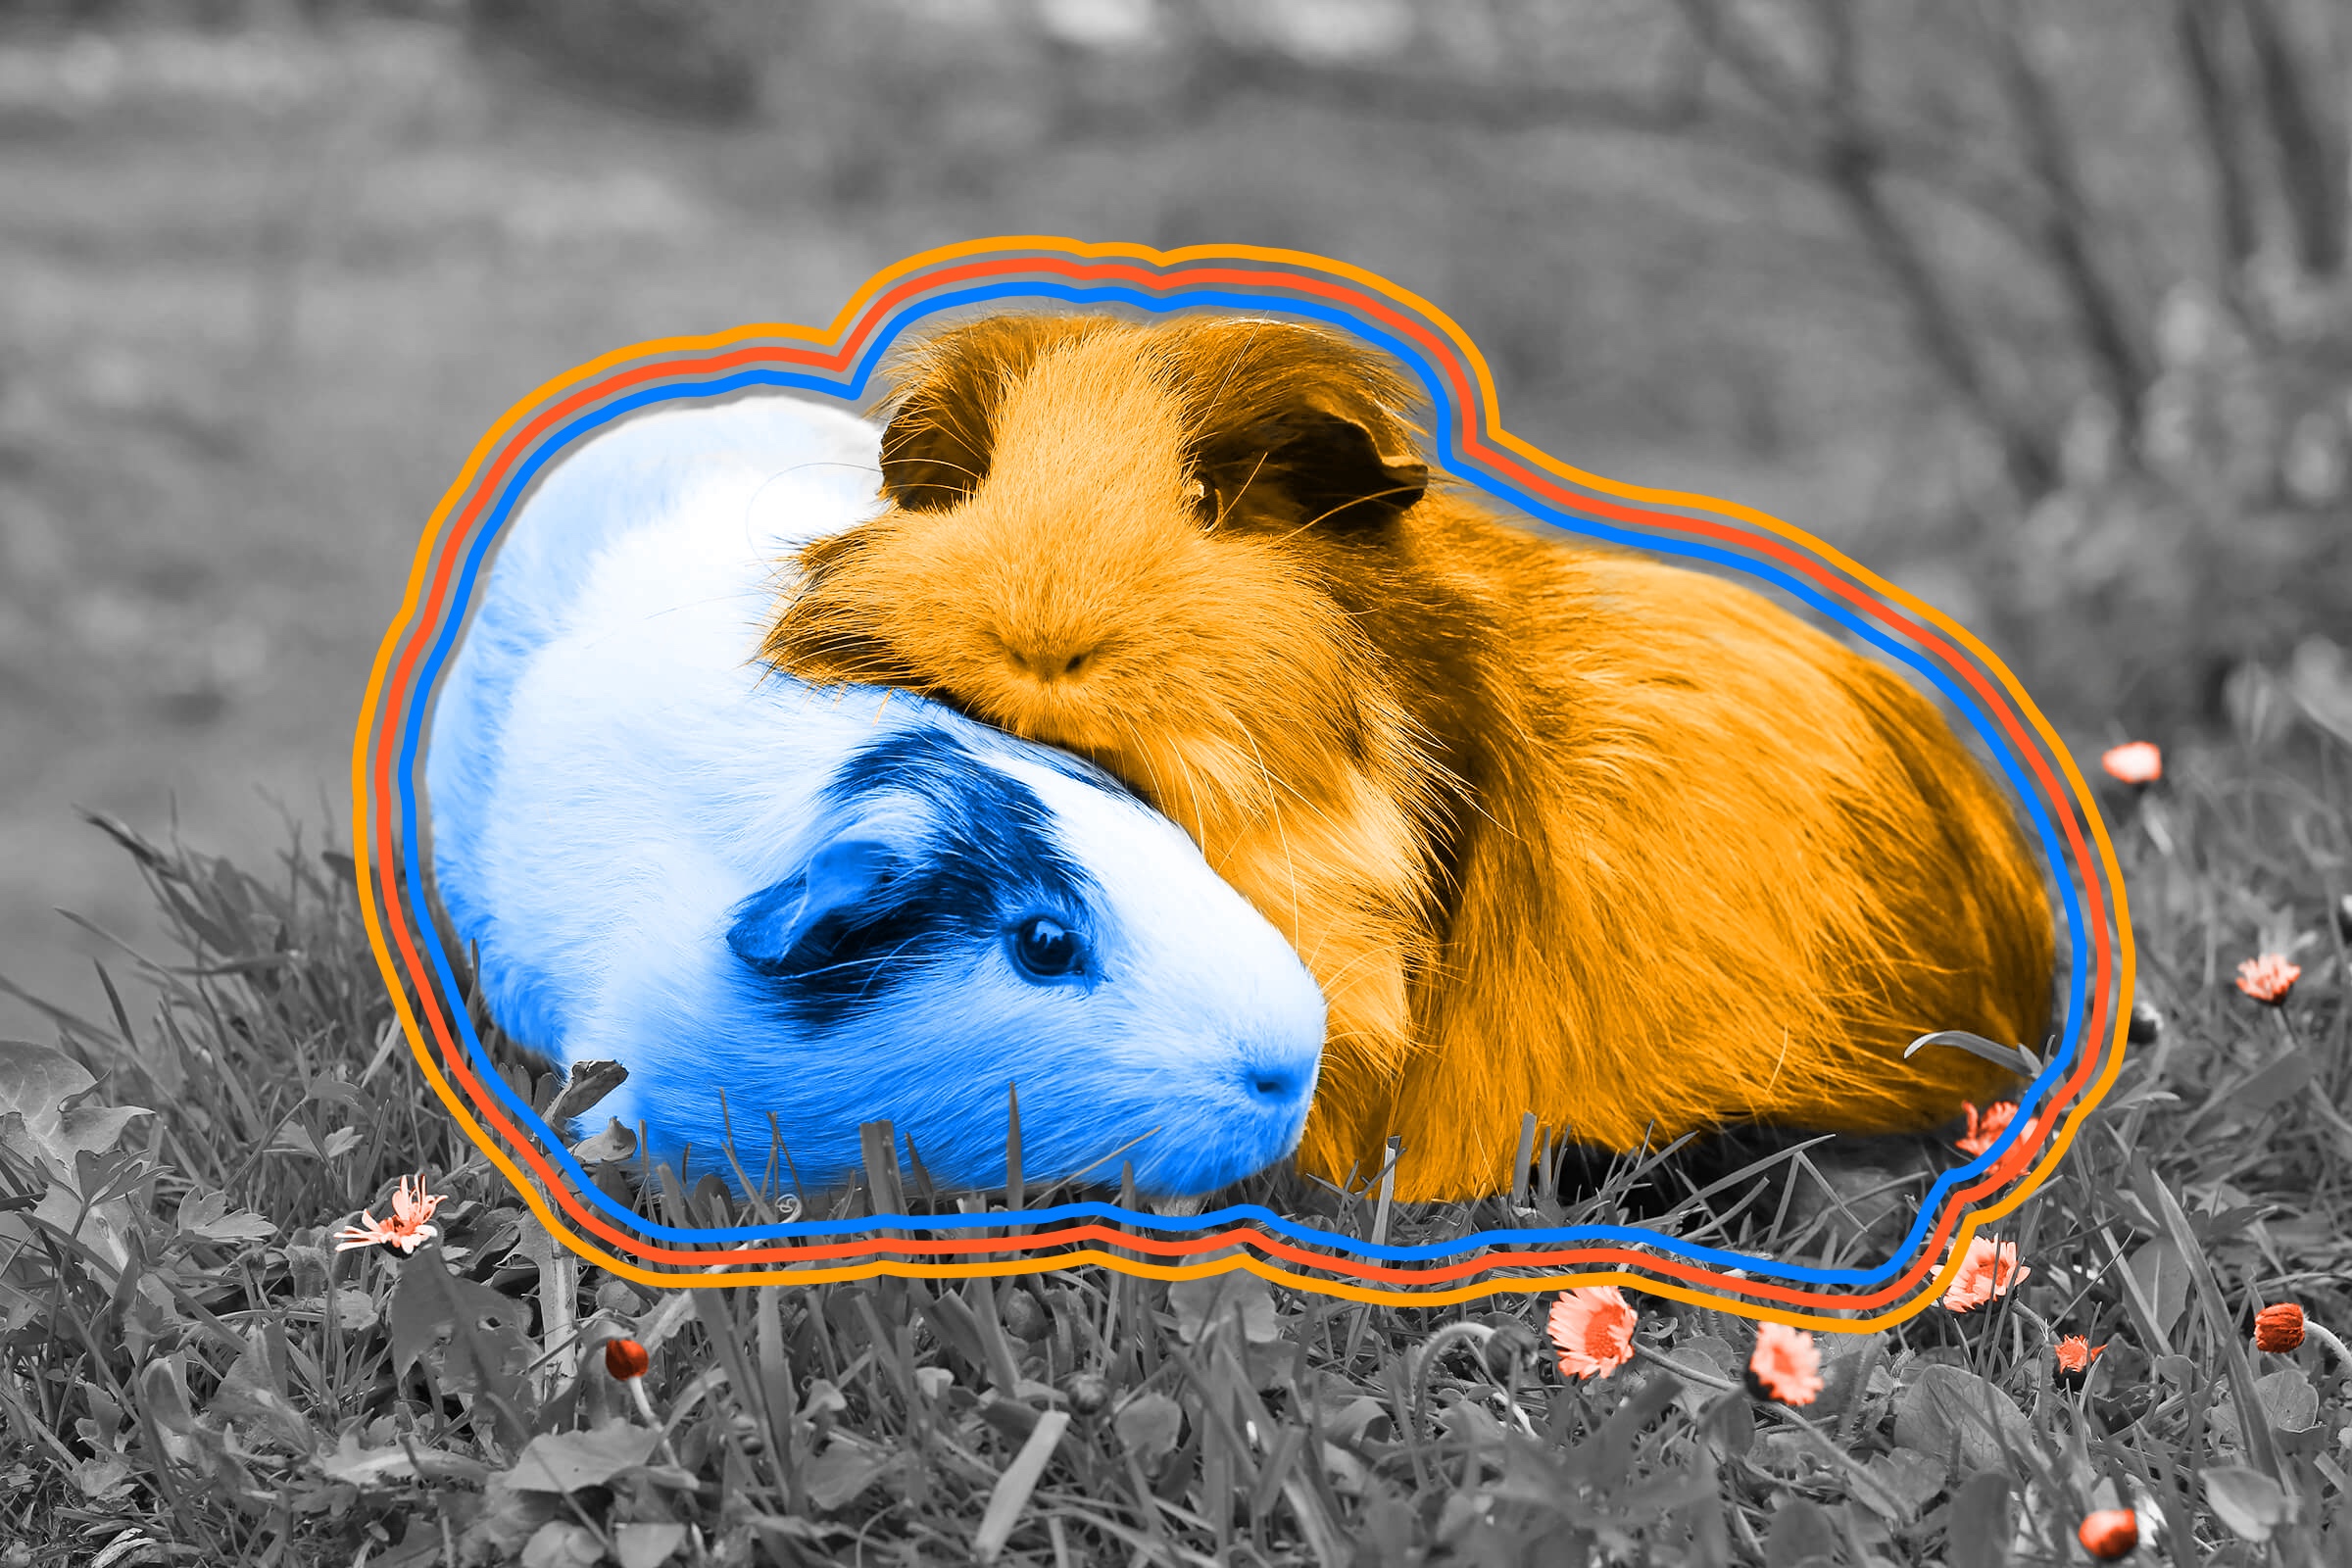 In Switzerland, it is illegal to own just one guinea pig.